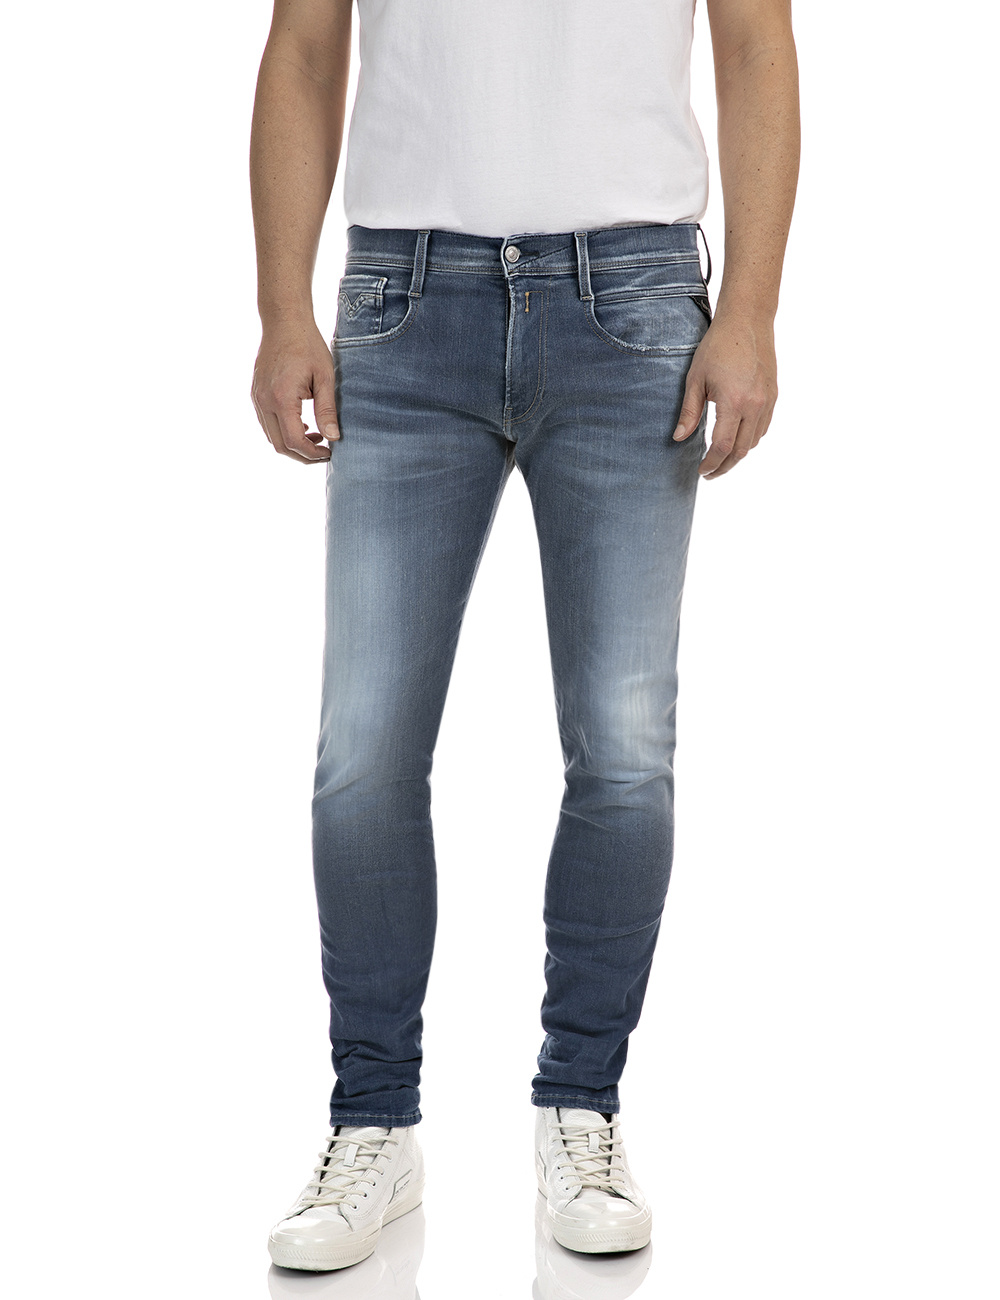 Nauwgezet dagboek Efficiënt REPLAY SLIM FIT HYPERFLEX RE-USED ANBASS JEANS - KING Jeans & Casuals